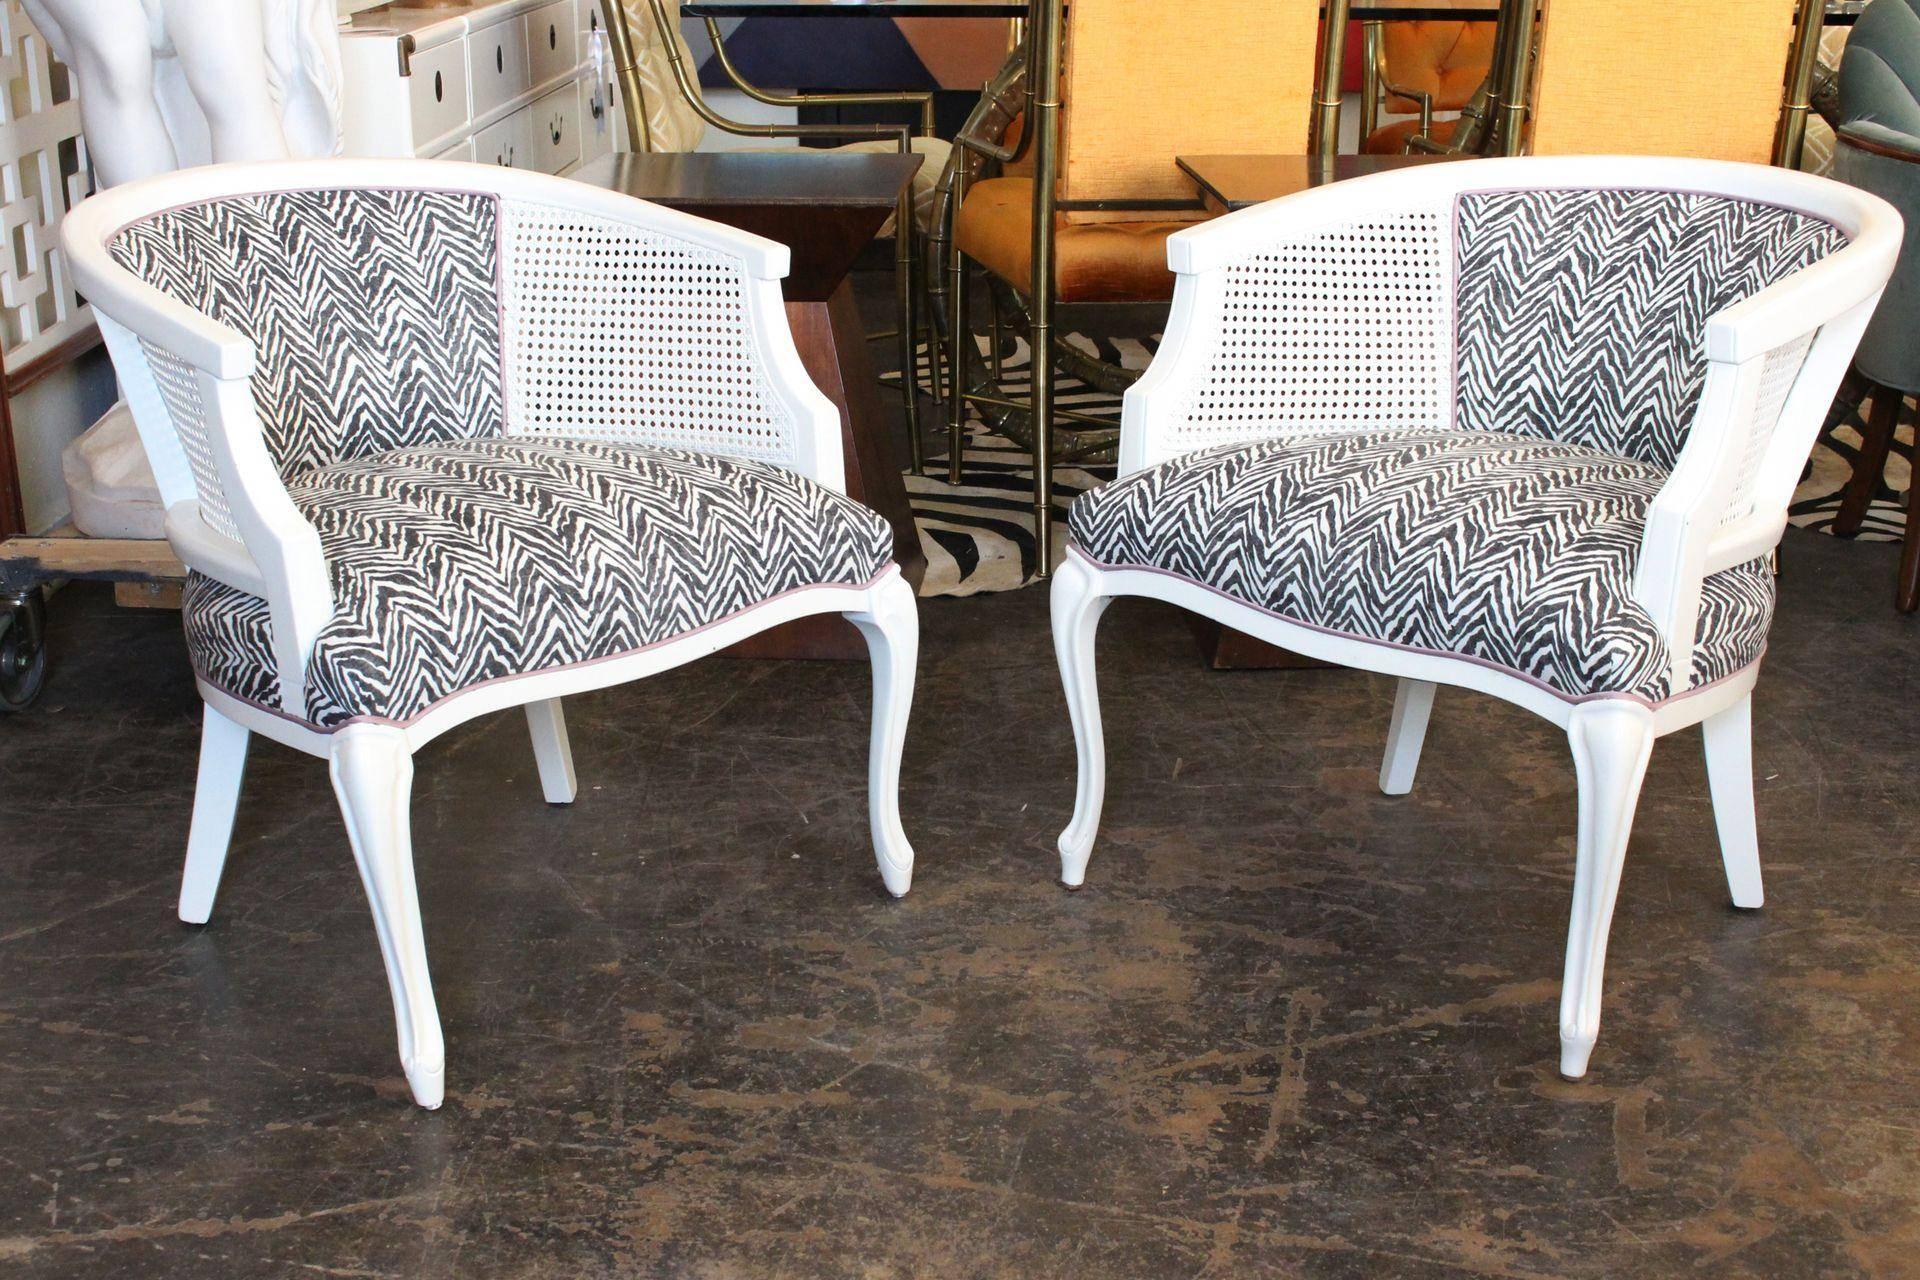 Pair of newly lacquered and upholstered cane barrel chairs. Upholstered in fun zebra fabric with lilac cording with the lilac fabric on back.

Dimensions: 25.5